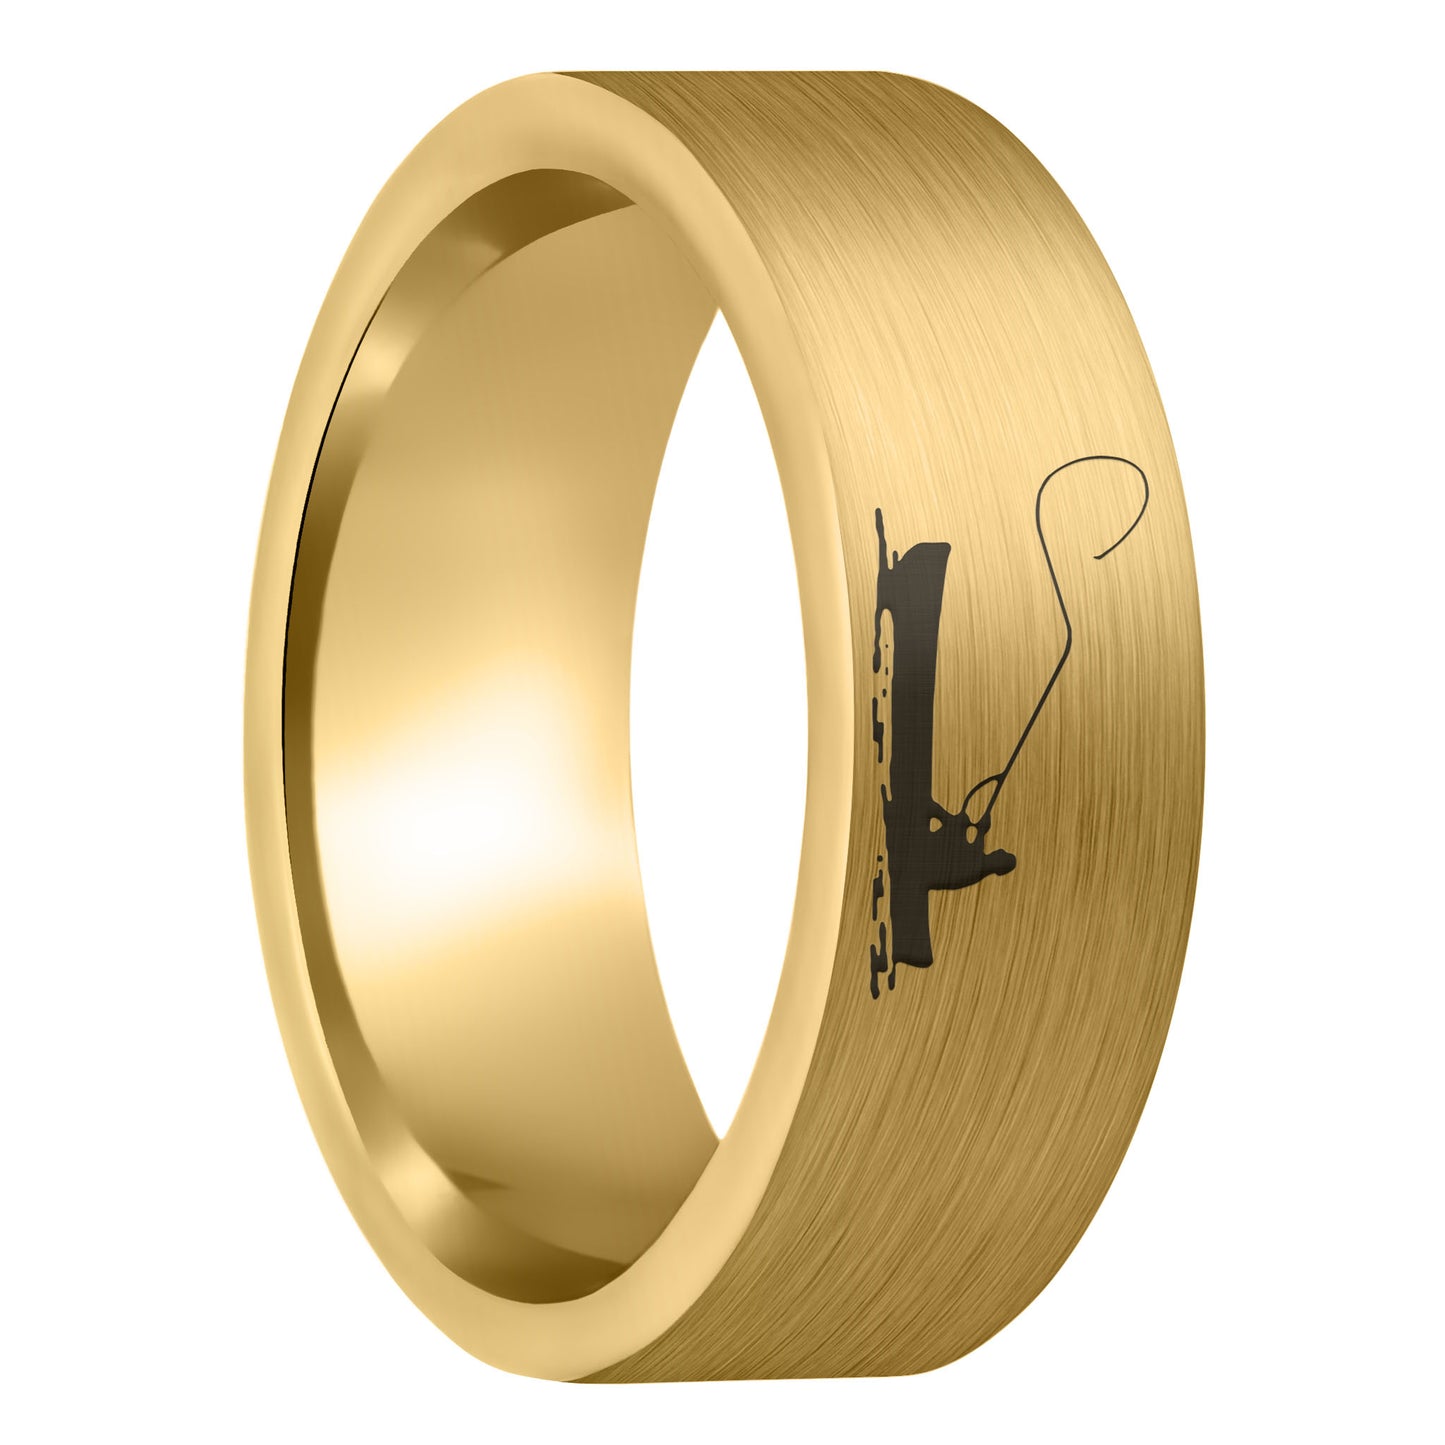 A fisherman boat scene brushed gold tungsten men's wedding band displayed on a plain white background.